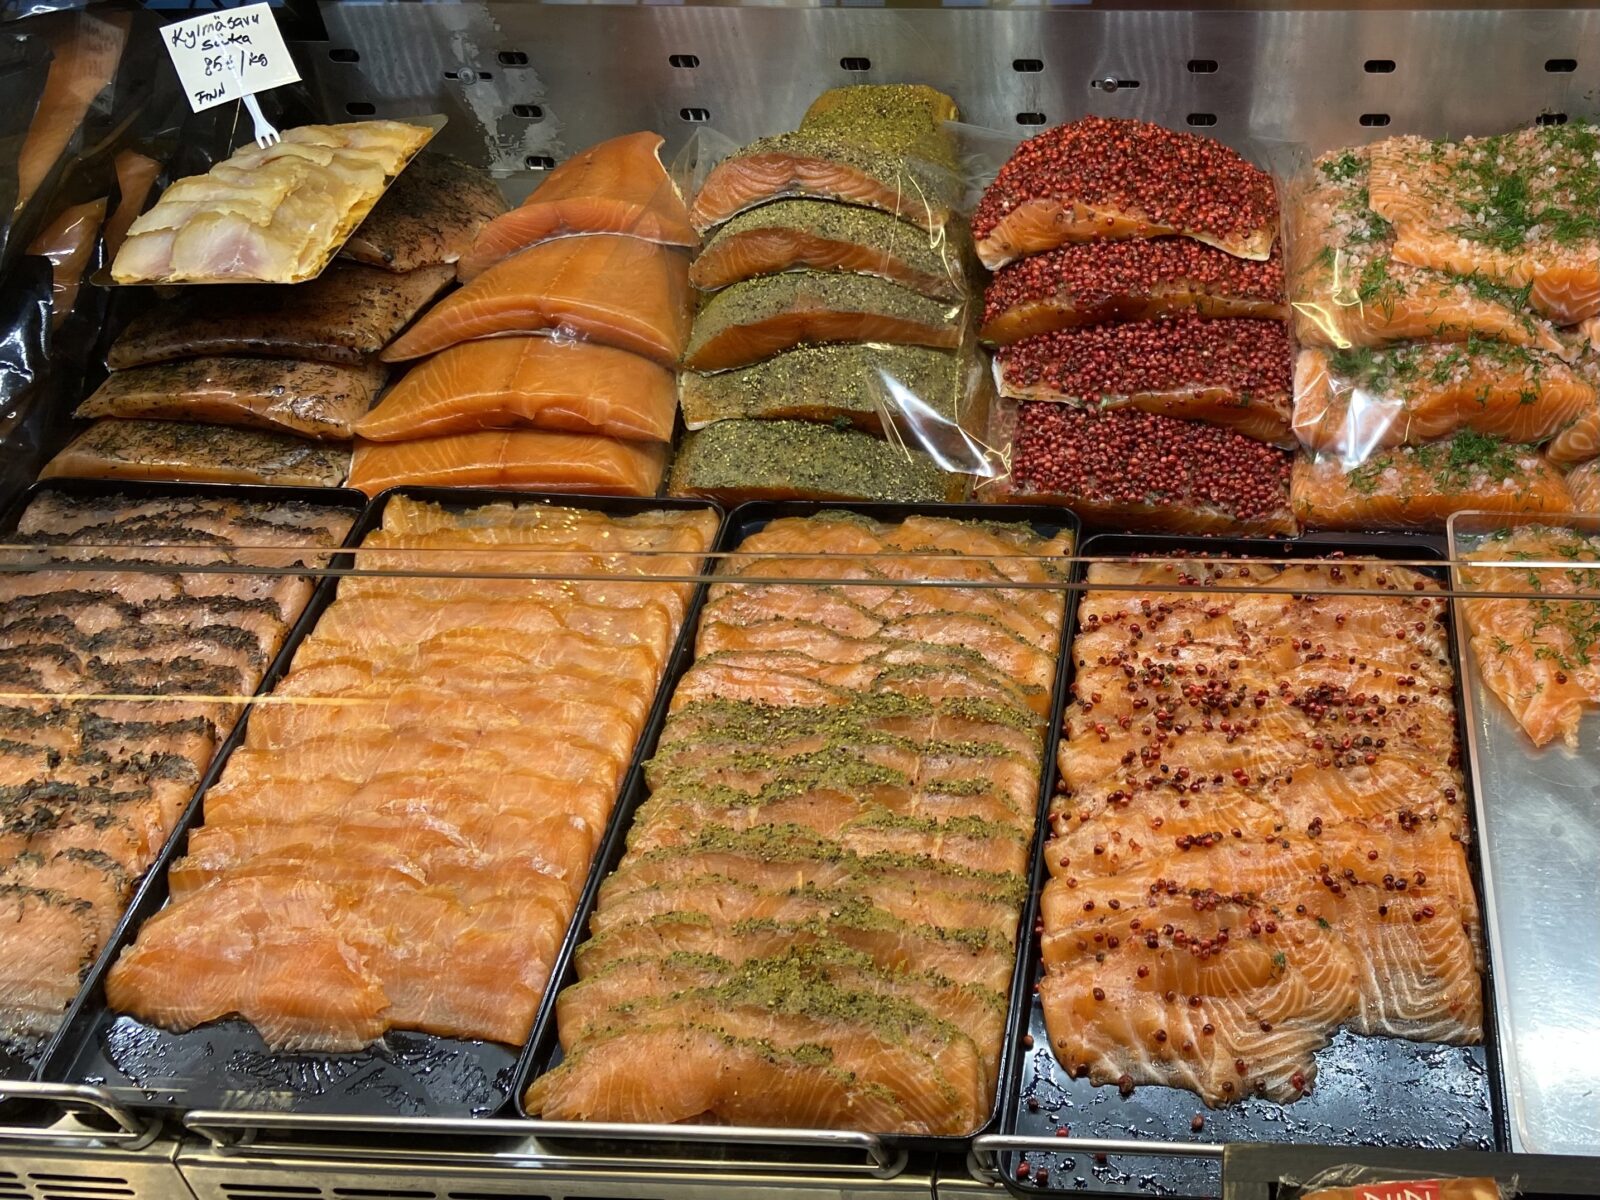 A salmon stall at Market Hall.